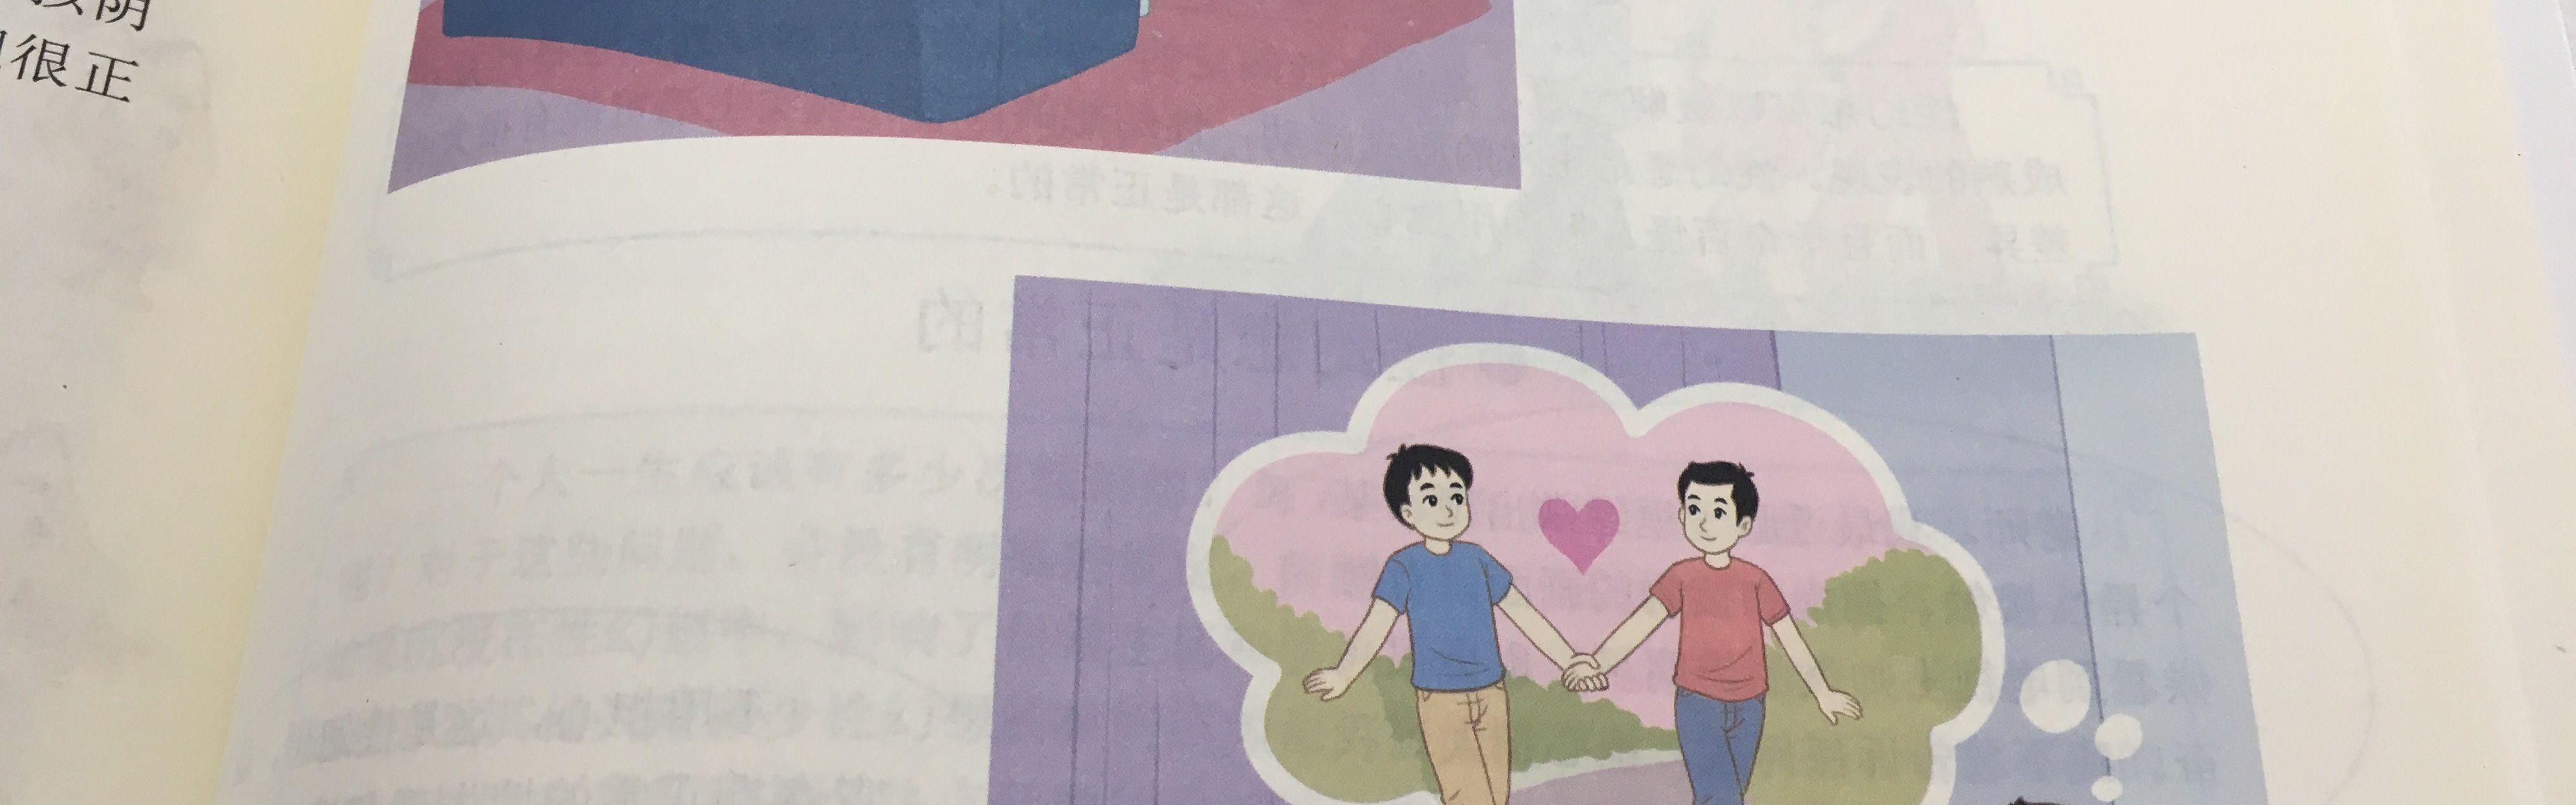 4032px x 1260px - Shock and praise for groundbreaking sex-ed textbook in China | CNN